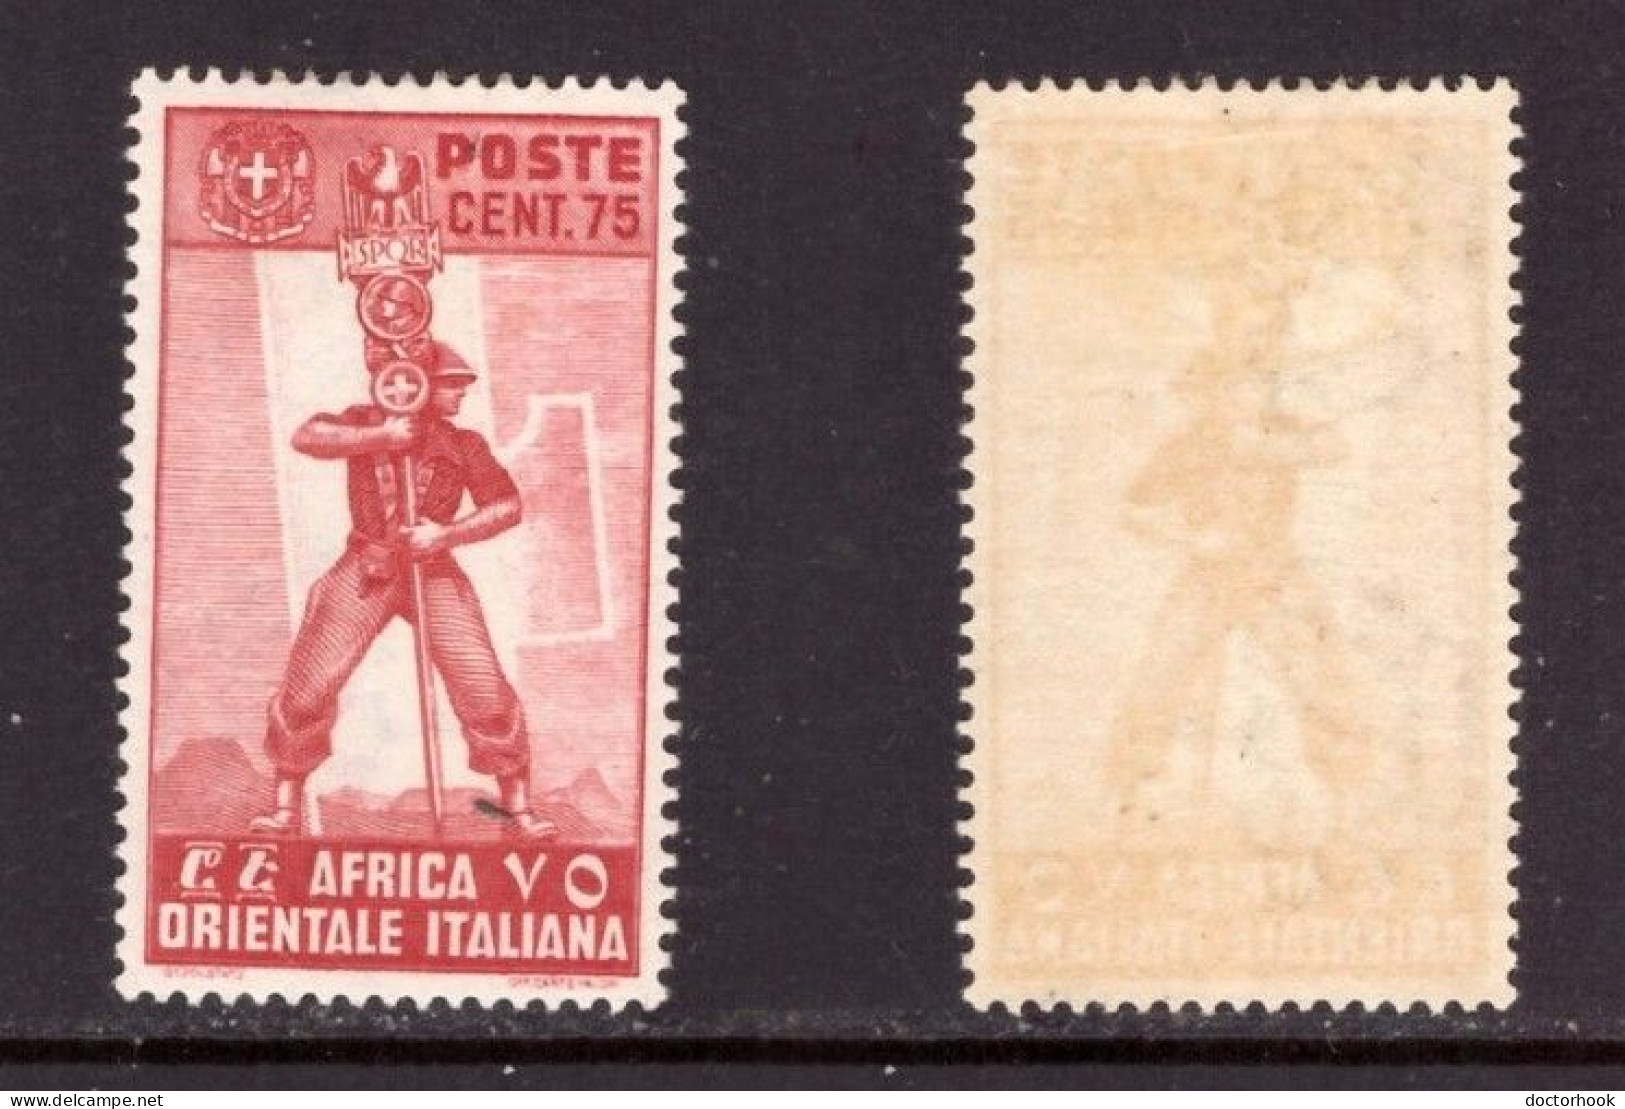 ITALIAN EAST AFRICA   Scott # 11* MINT LH (CONDITION AS PER SCAN) (Stamp Scan # 956-16) - Africa Orientale